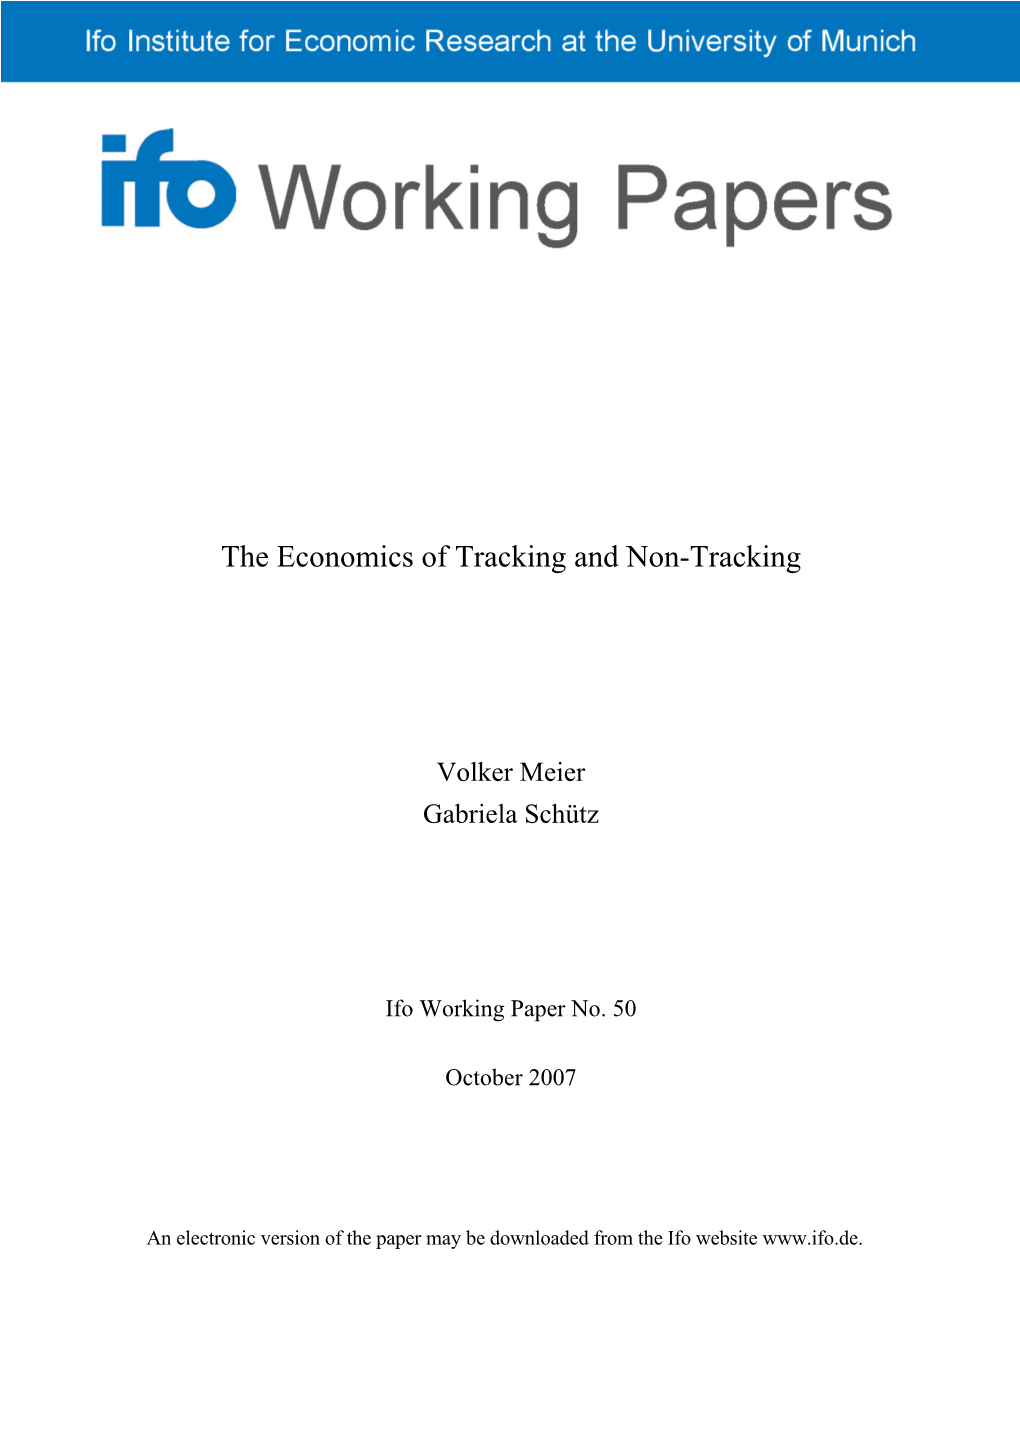 The Economics of Tracking and Non-Tracking